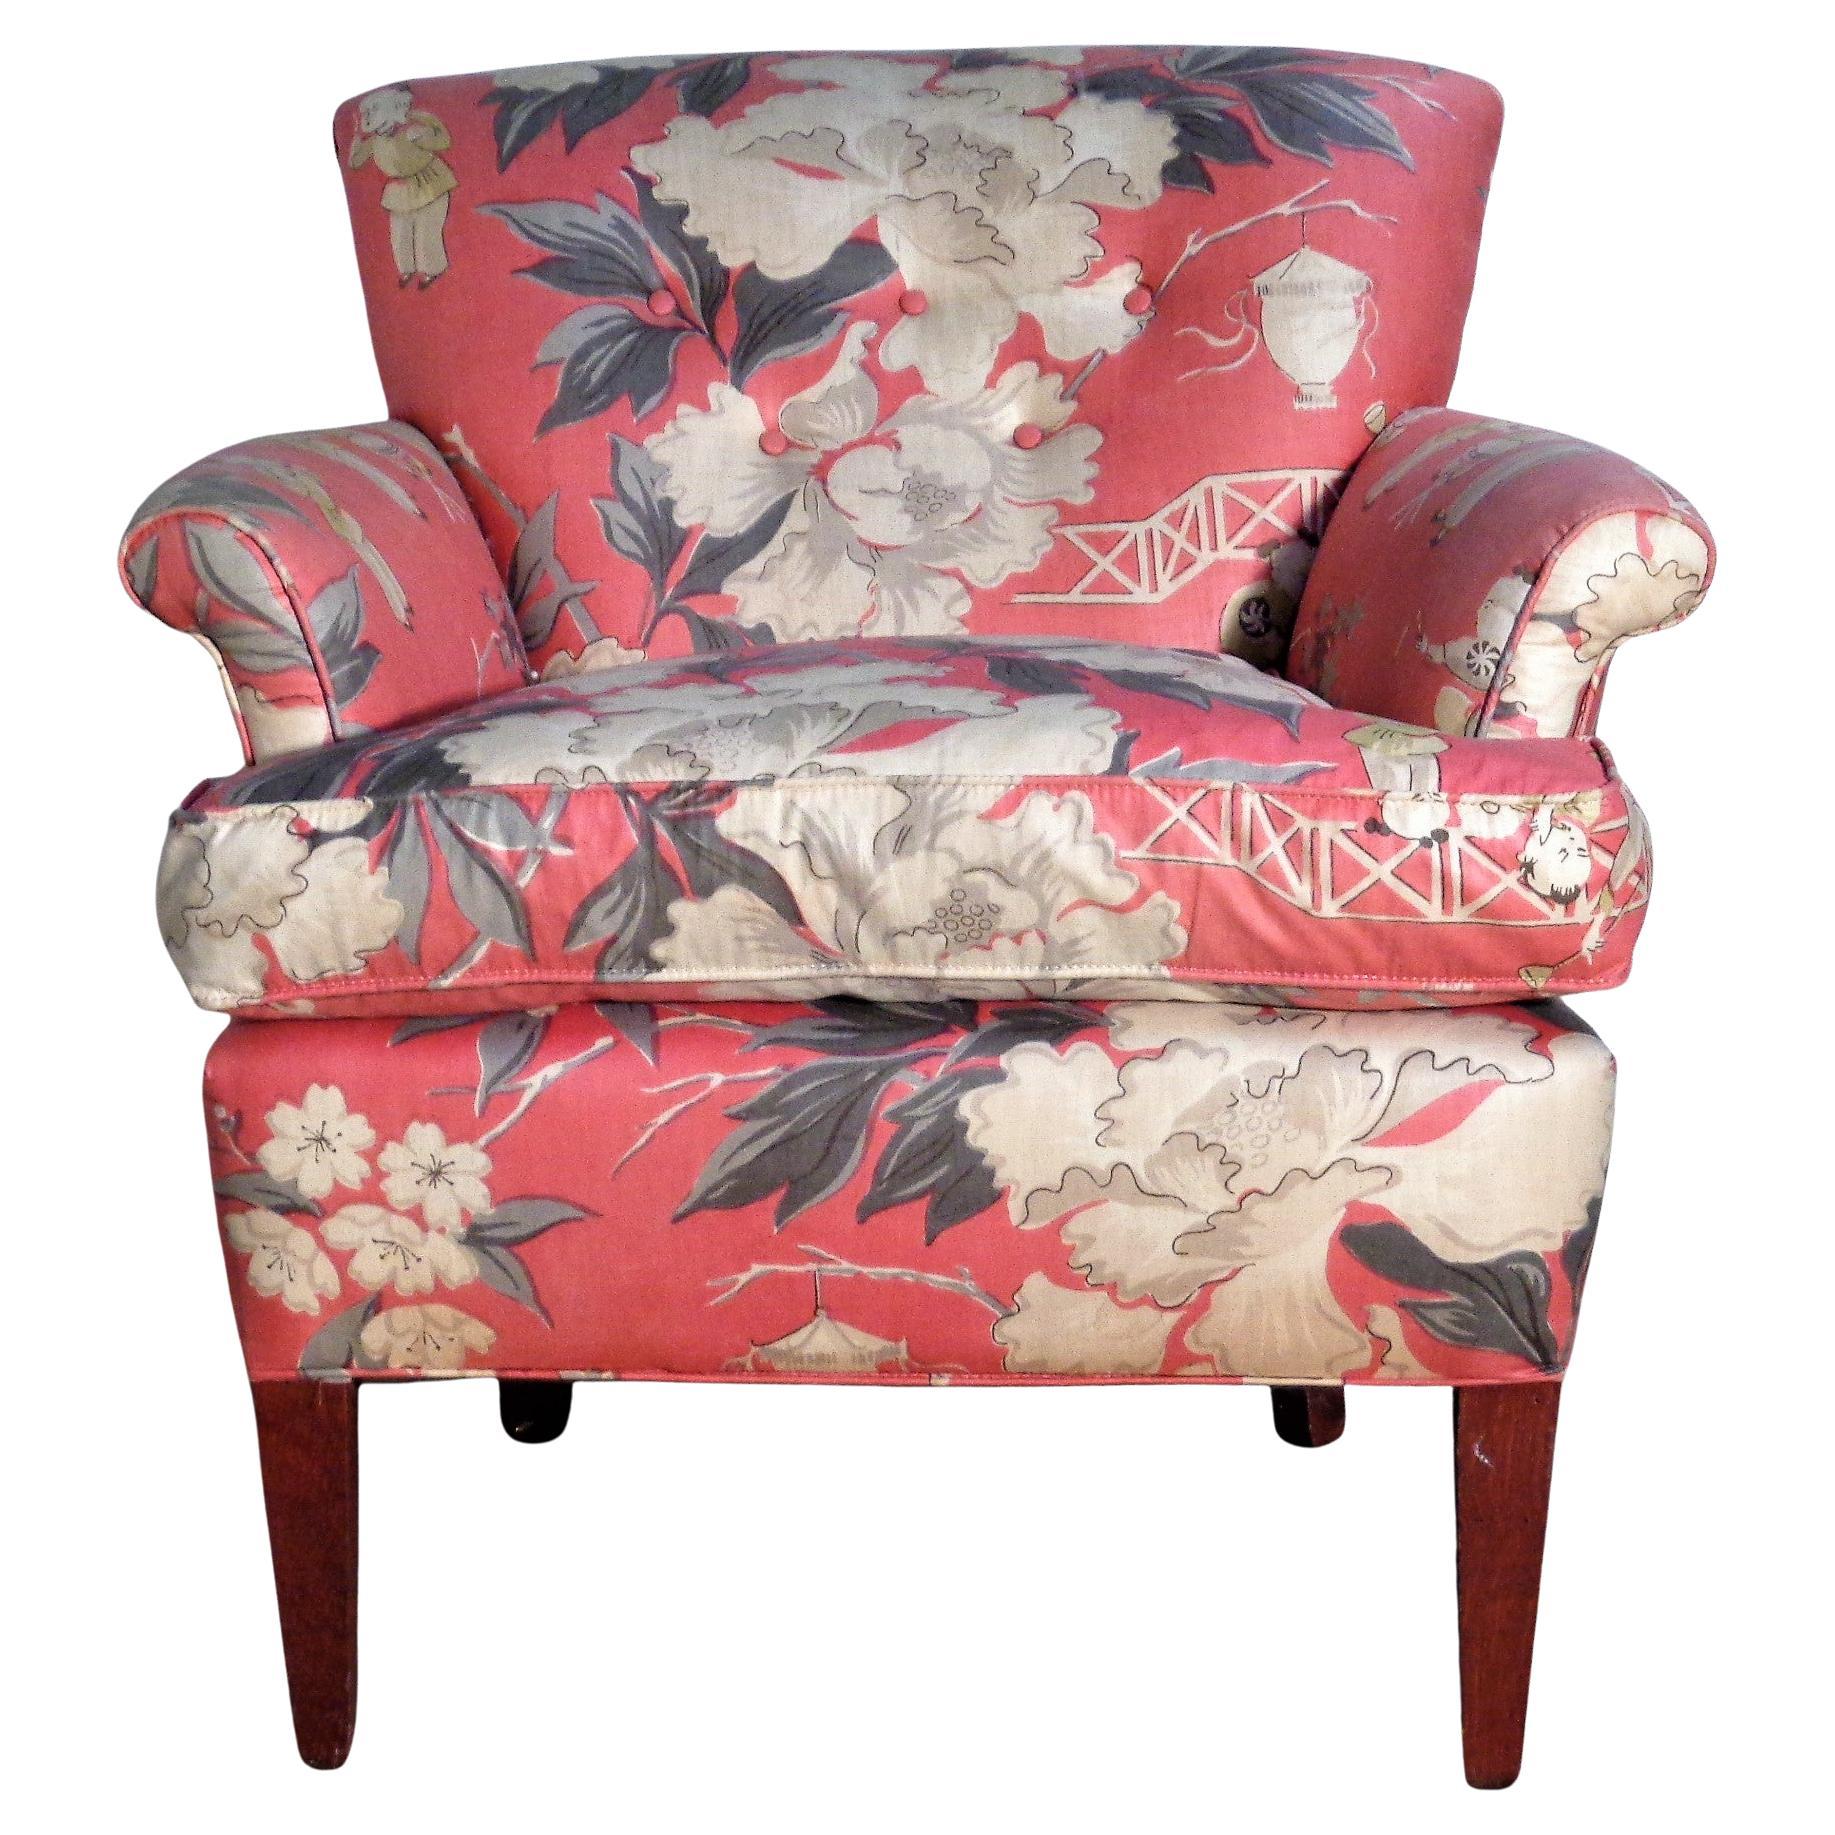  Dorothy Draper Style Original Chinoiserie Upholstered Lounge Chair, 1940's For Sale